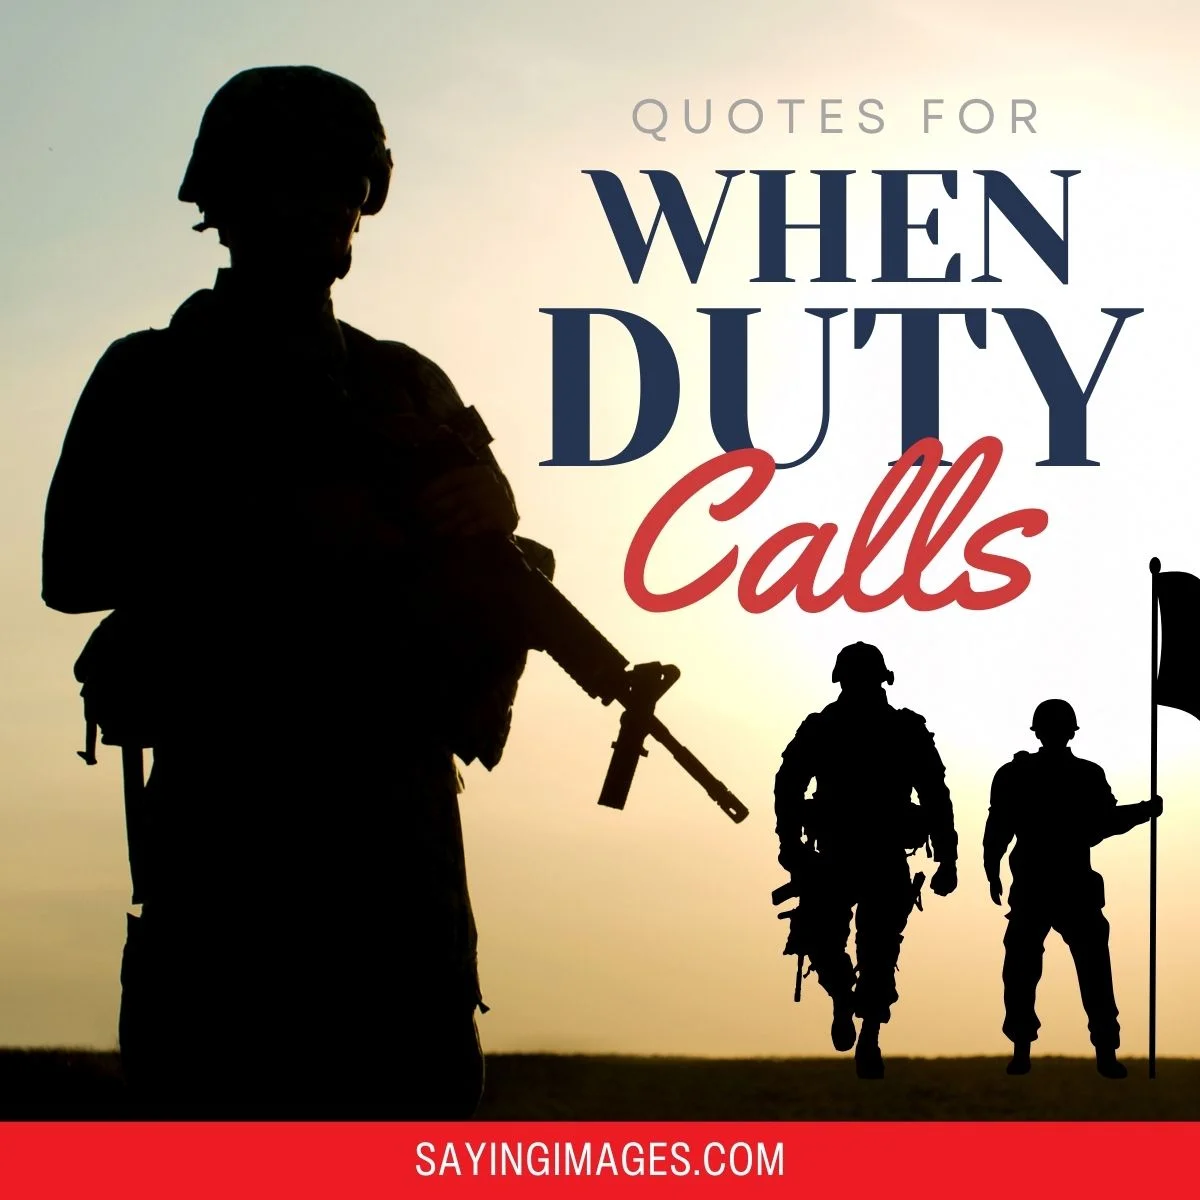 Quotes For When Duty Calls